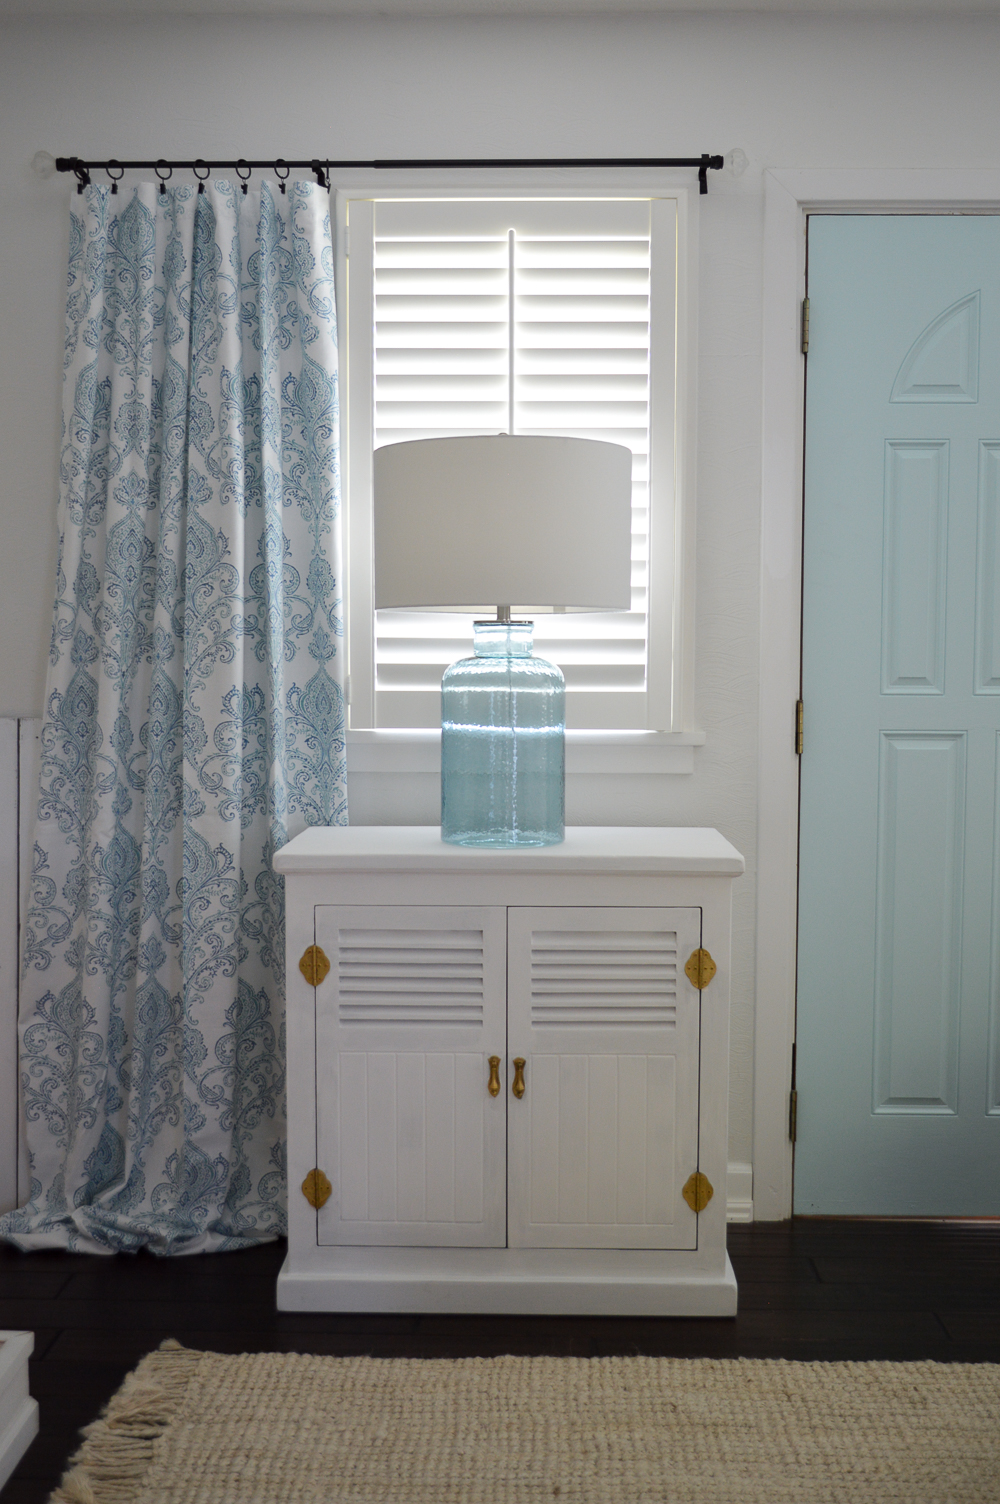 I'm bringing aqua back to my cottage home, for an airy coastal feel. Aqua Blue Cottage Home Decorating Ideas at Fox Hollow Cottage blog - www.foxhollowcottage.com